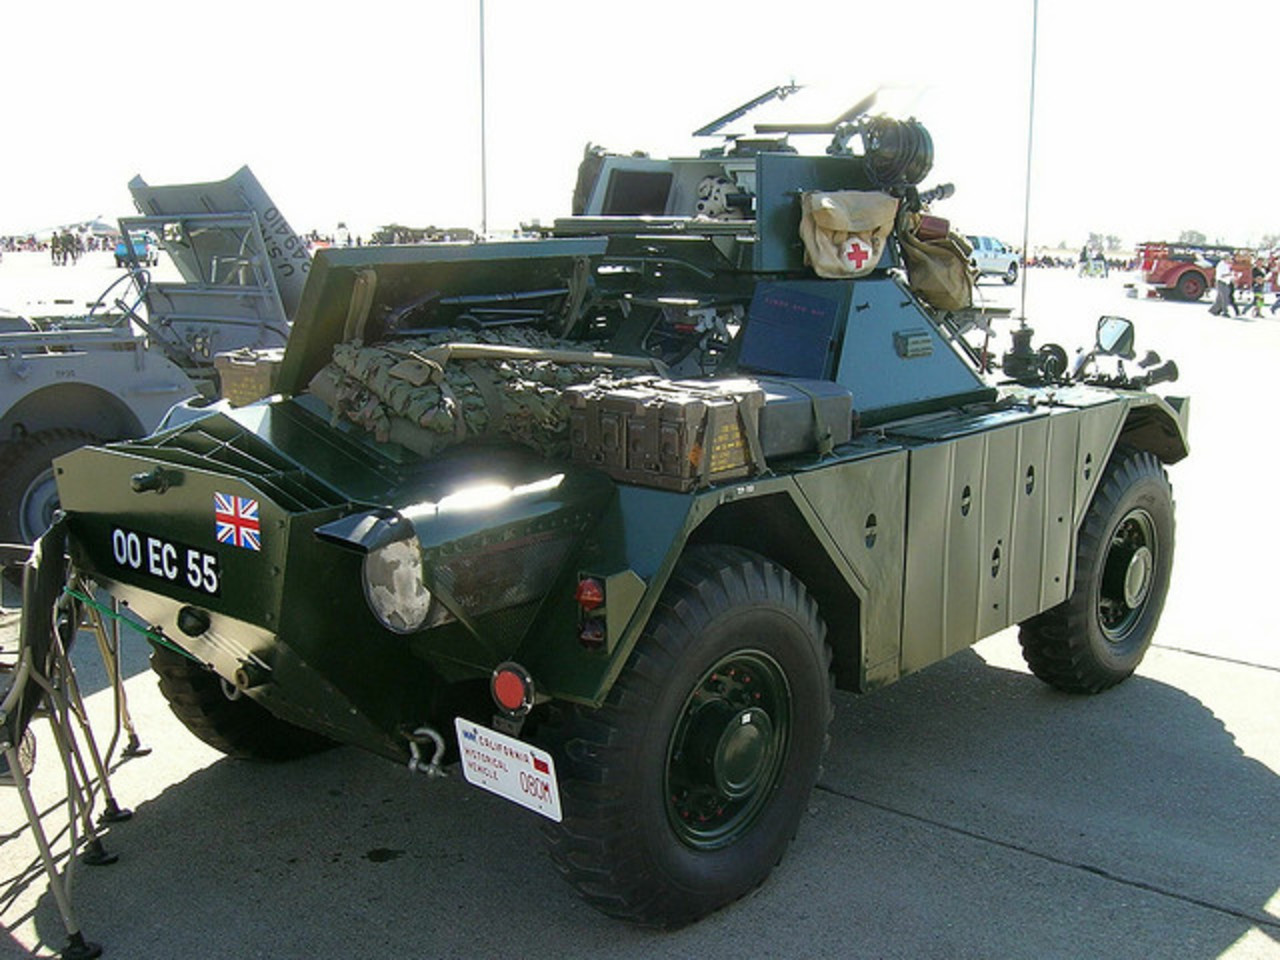 1967 Daimler Ferret Armored Scout Car 3 | Flickr - Photo Sharing!